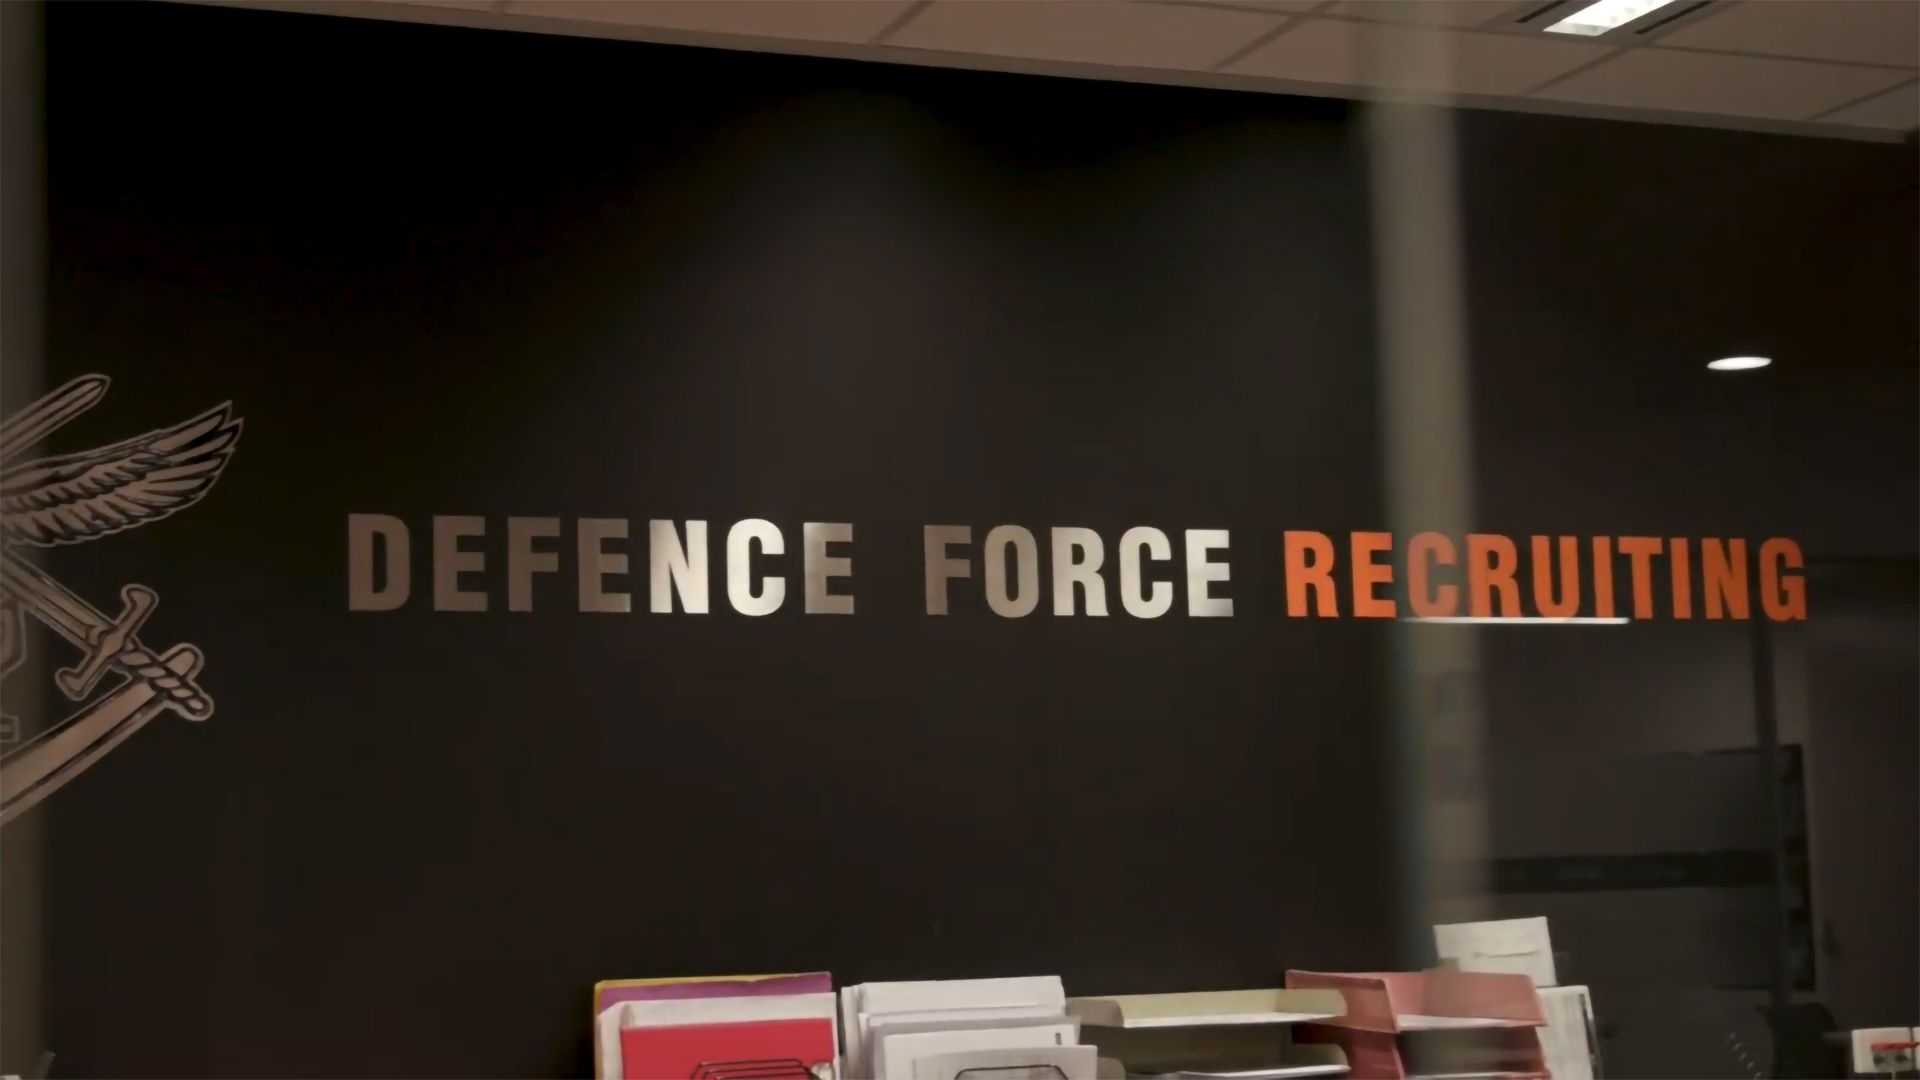 A Defence Force Recruiting office. 